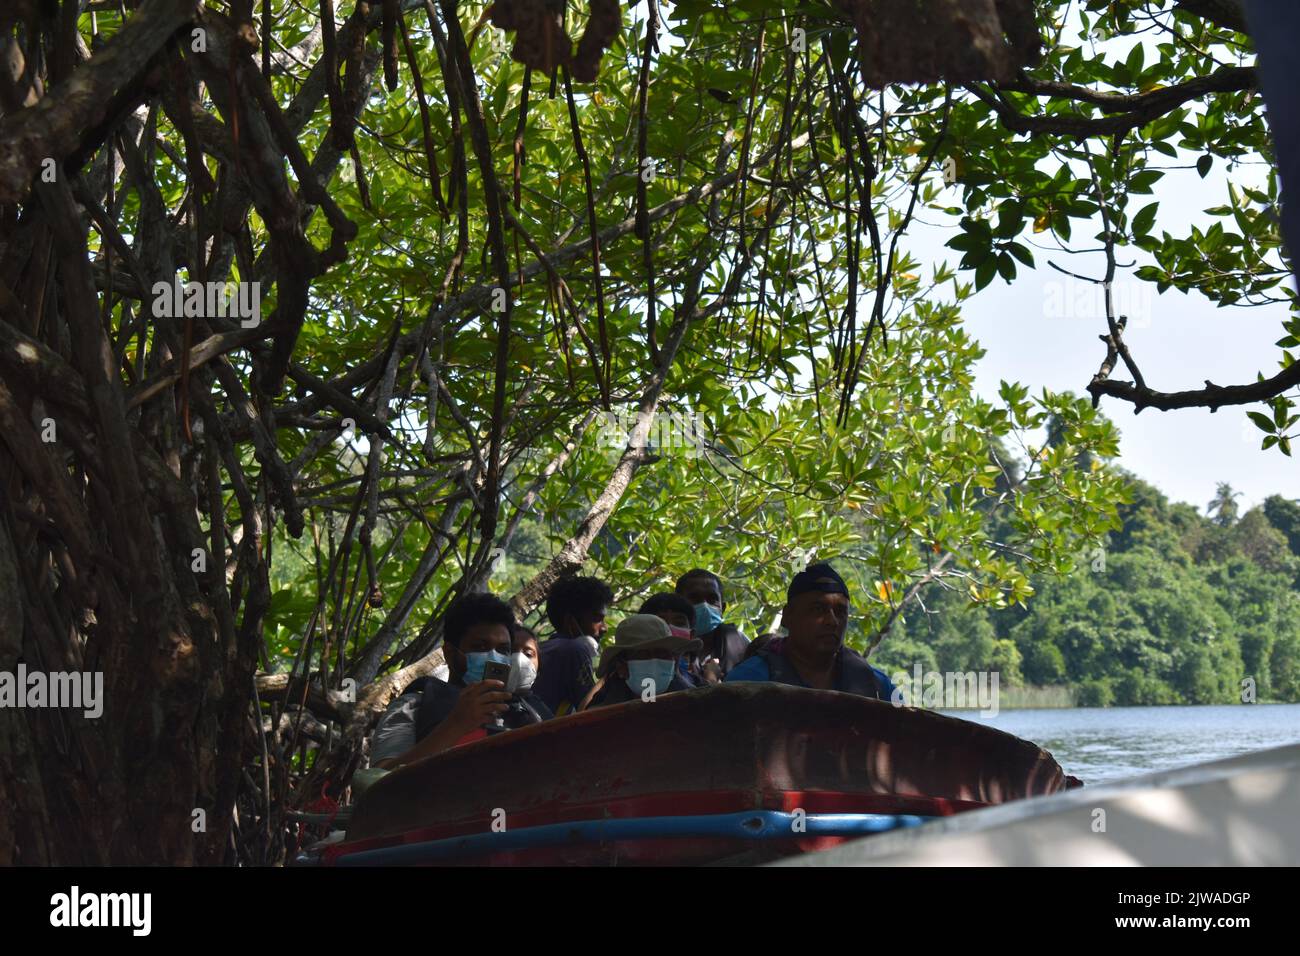 The Madu River Safari is popular activity that has to be on the to do list of any respectable Sri Lankan holiday goer. This unforgettable activity lasts for over two hours and gives a visitor a chance to travel the secretive passages through the mangrove forests and see the ecology. Madu Ganga is a minor watercourse which originates near Uragasmanhandiya in the Galle District of Sri Lanka, before widening into the Madu Ganga Lake at Balapitiya. The river then flows for a further a 4.4 km before draining into the Indian Ocean. It is located 88 km south of Colombo and 35 km north of Galle. Sri L Stock Photo